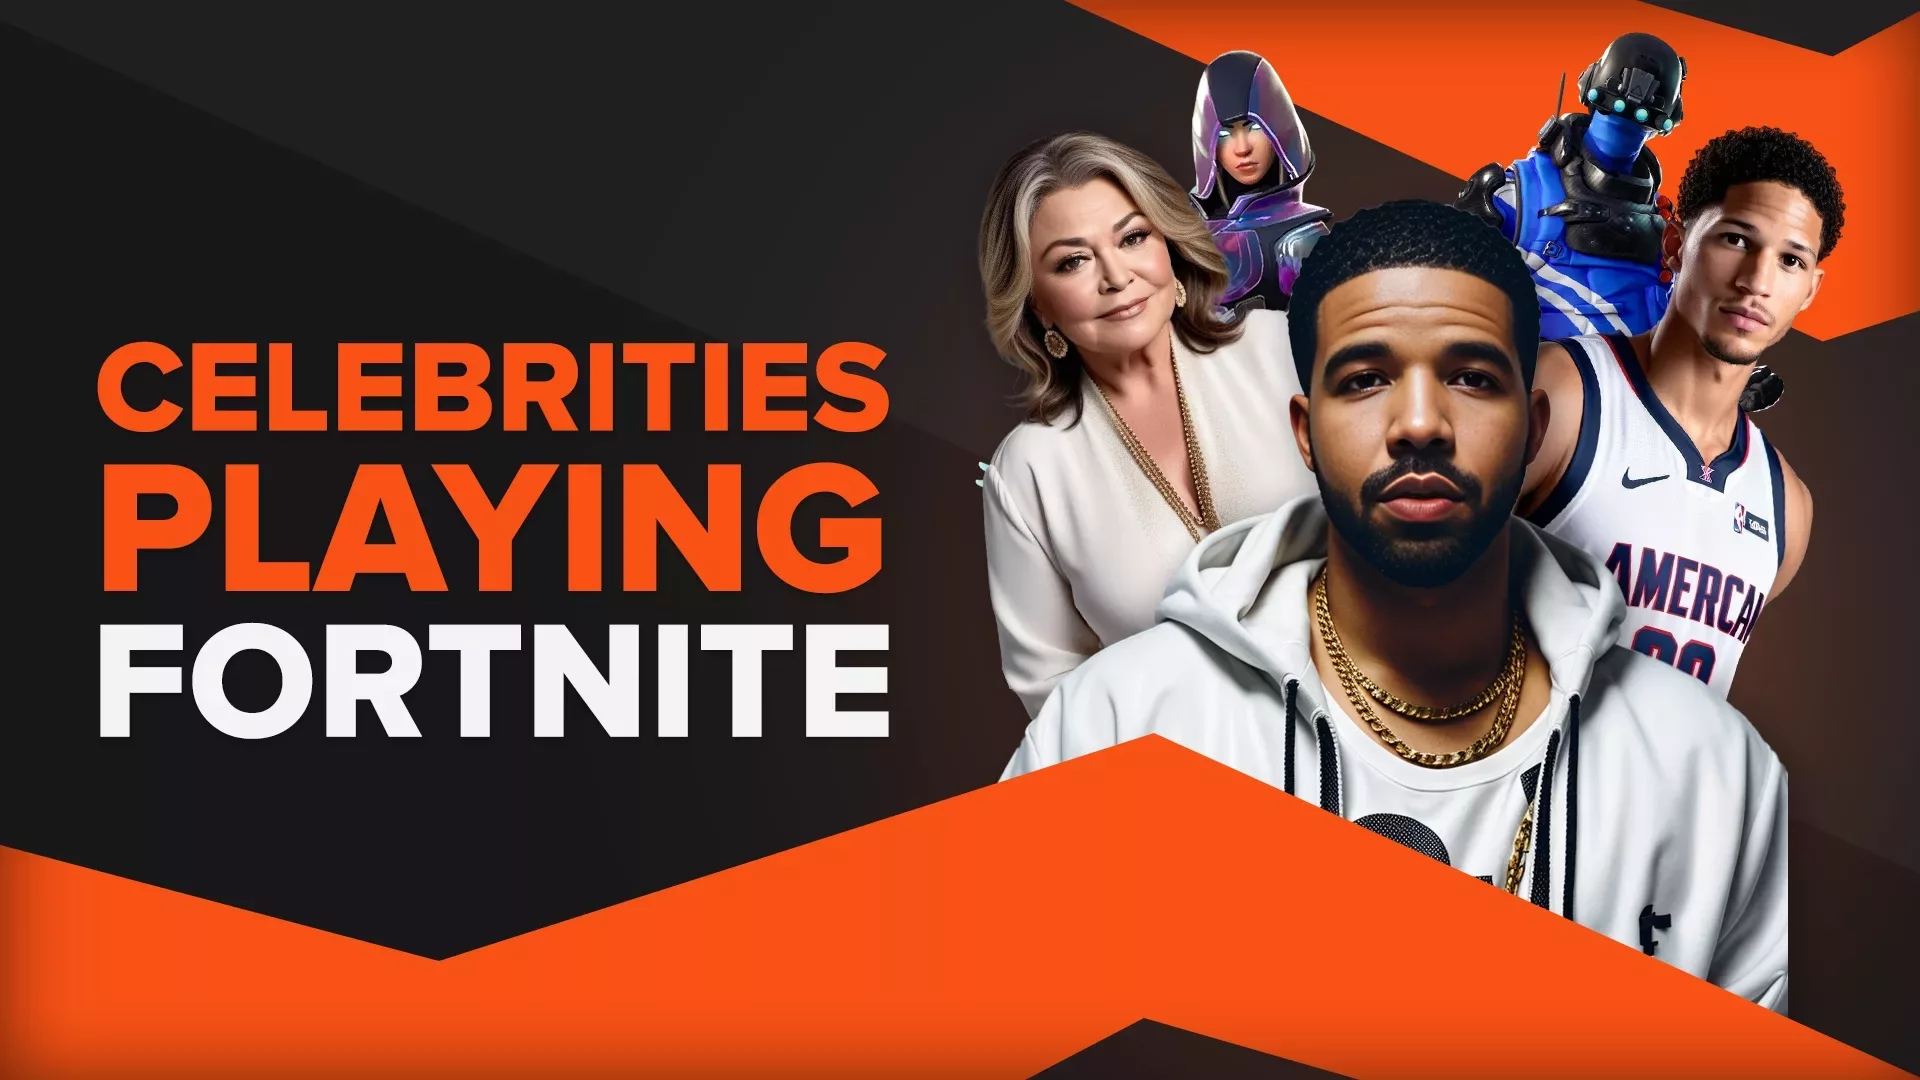 5 Celebrities Who Play Fortnite [You Won't Believe #3]